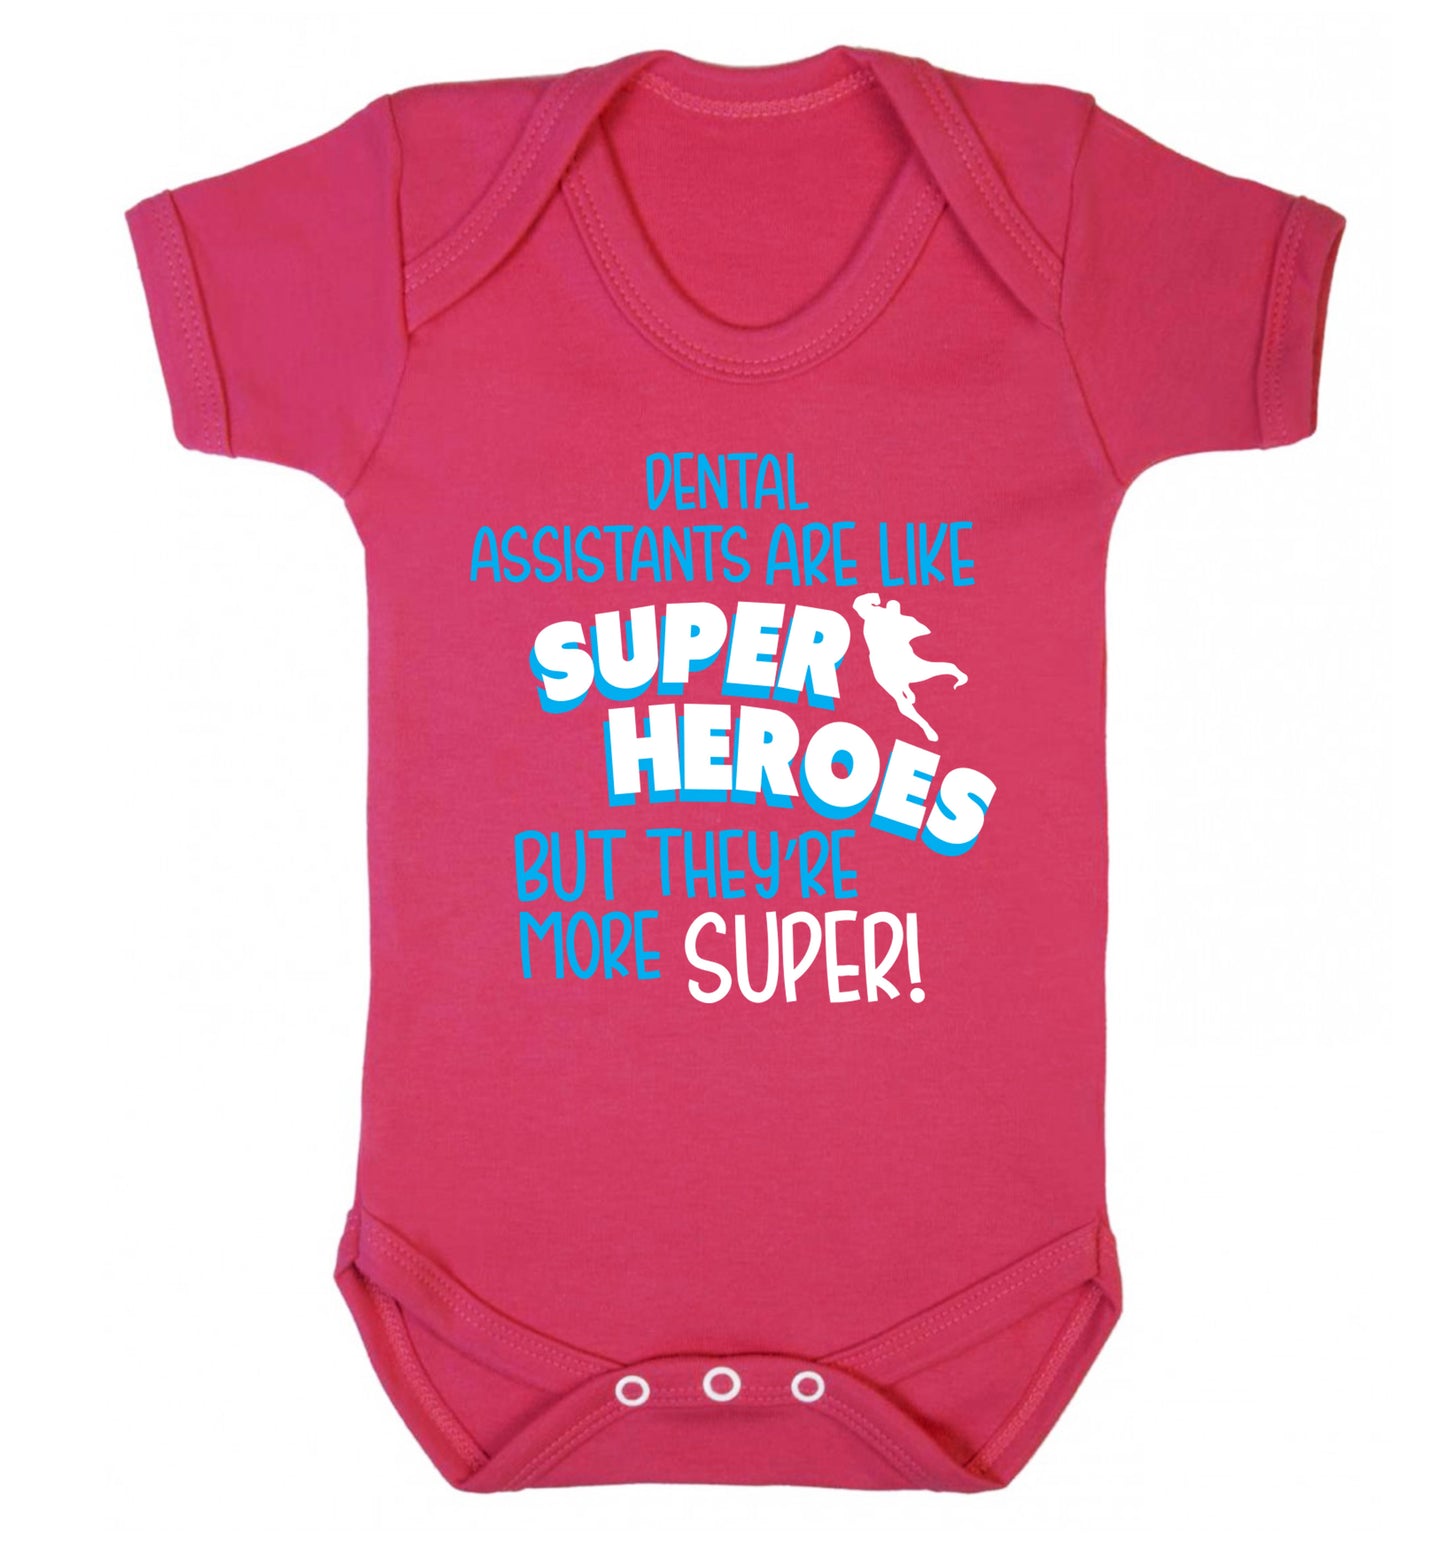 Dental Assistants are like superheros but they're more super Baby Vest dark pink 18-24 months